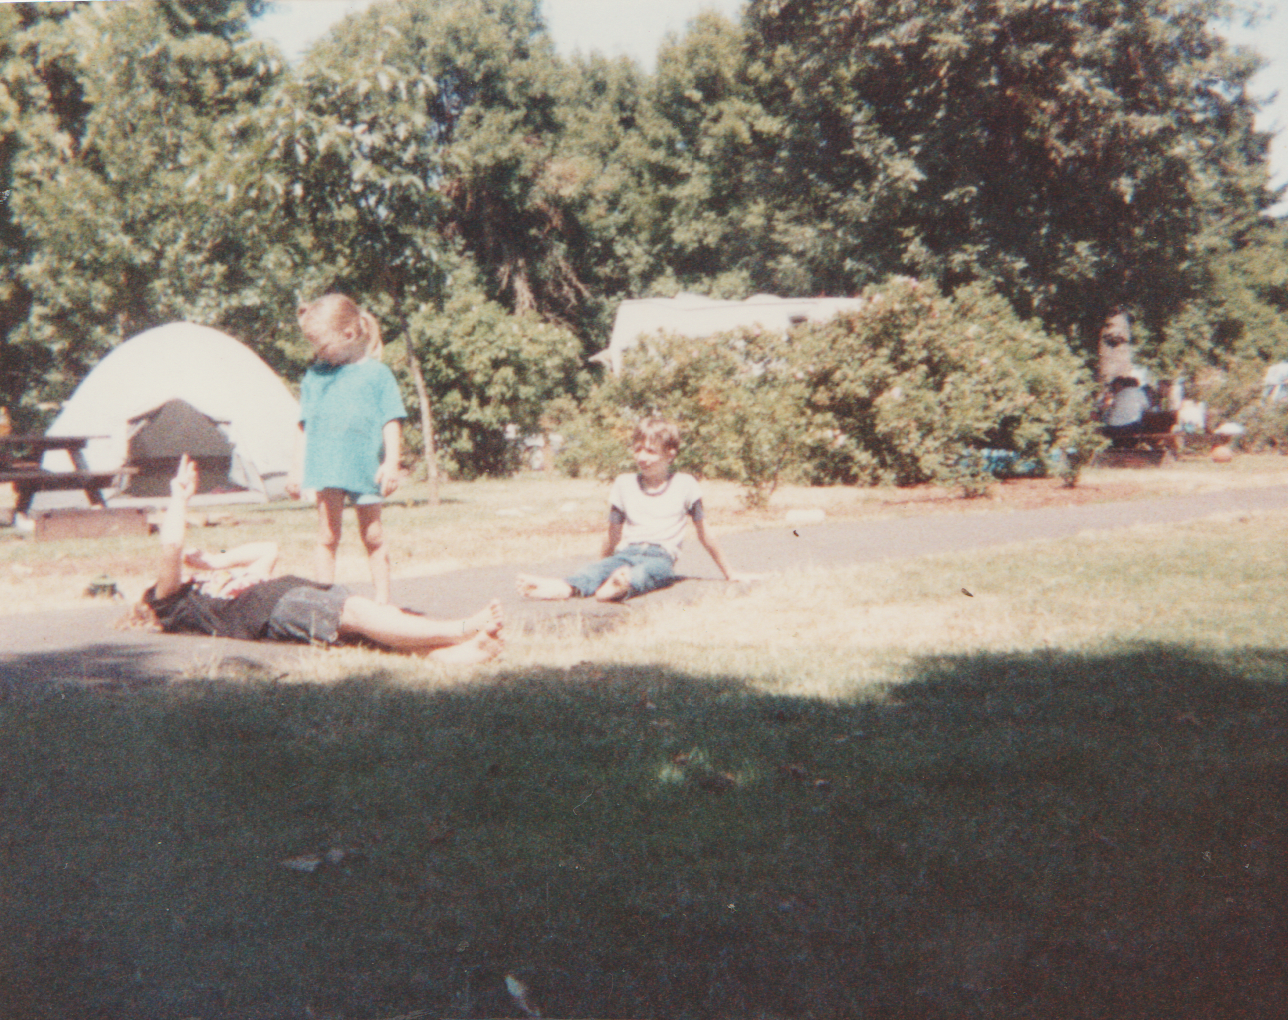 1991-08 - Camping - Joey, Rick, Crystal, Katie, mom, dad, others, tent, picnic table, field, food, playing, includes maybe Sunday or weekend-3.png